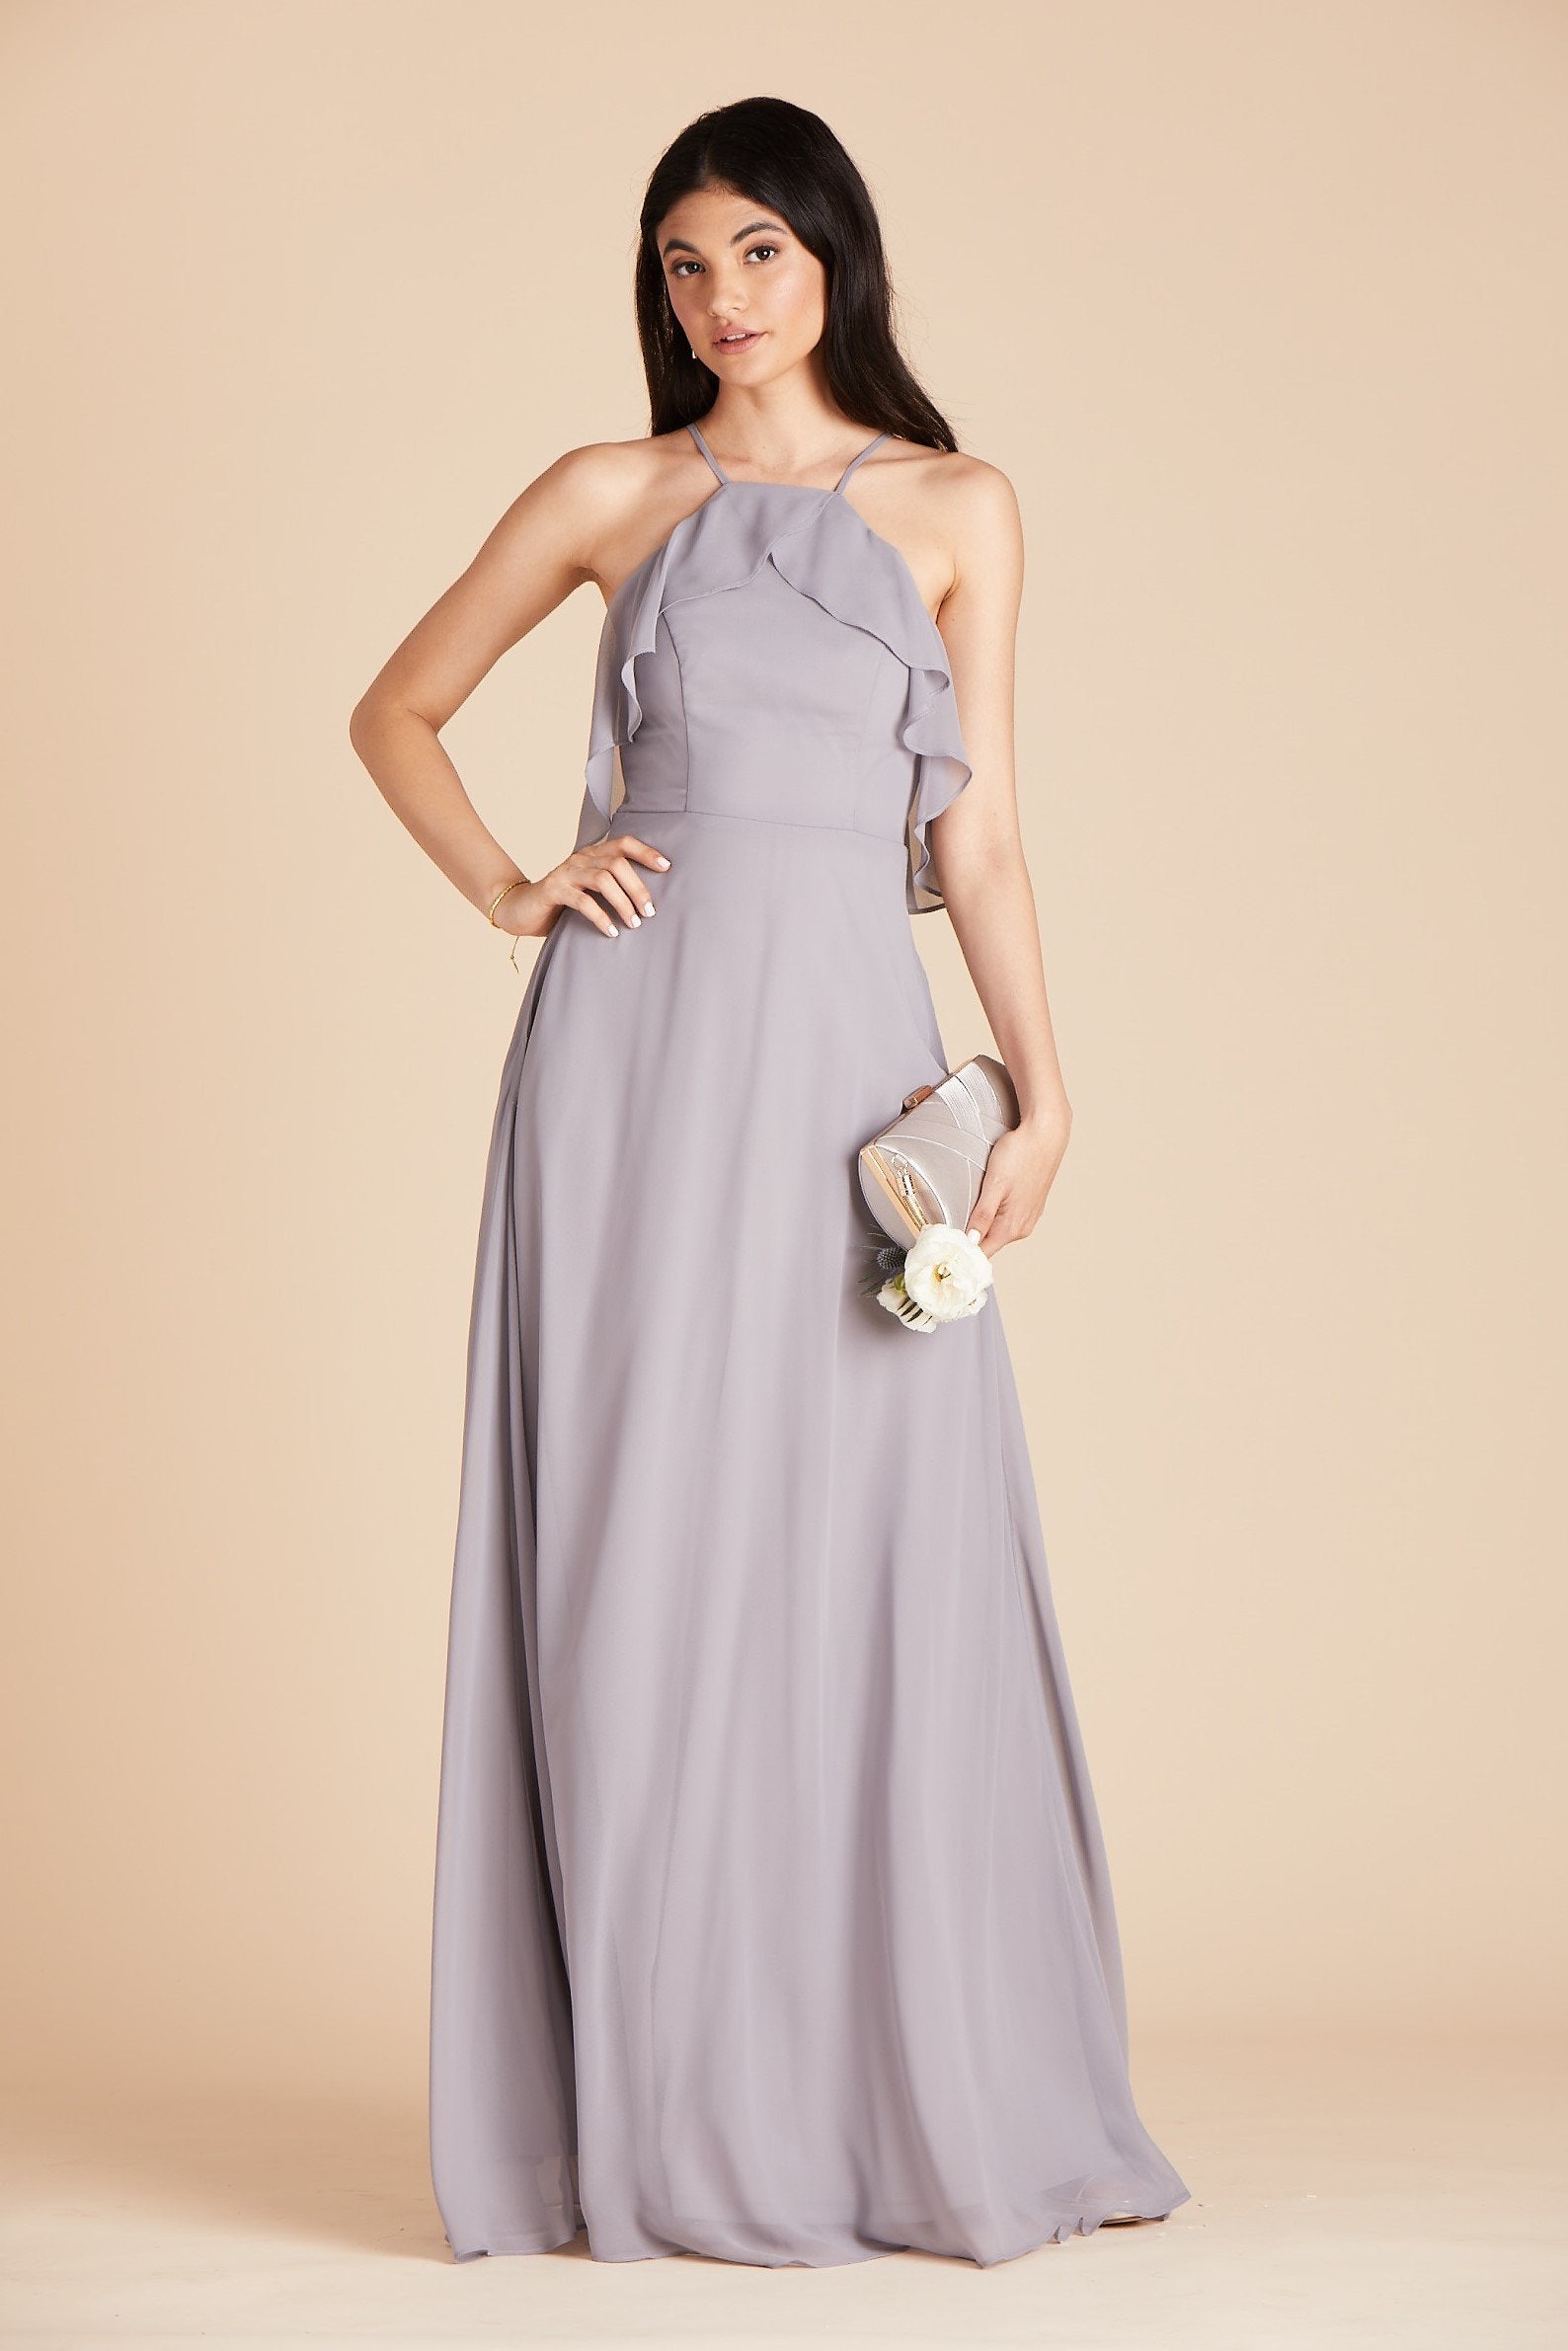 Jules bridesmaid dress in silver chiffon by Birdy Grey, front view